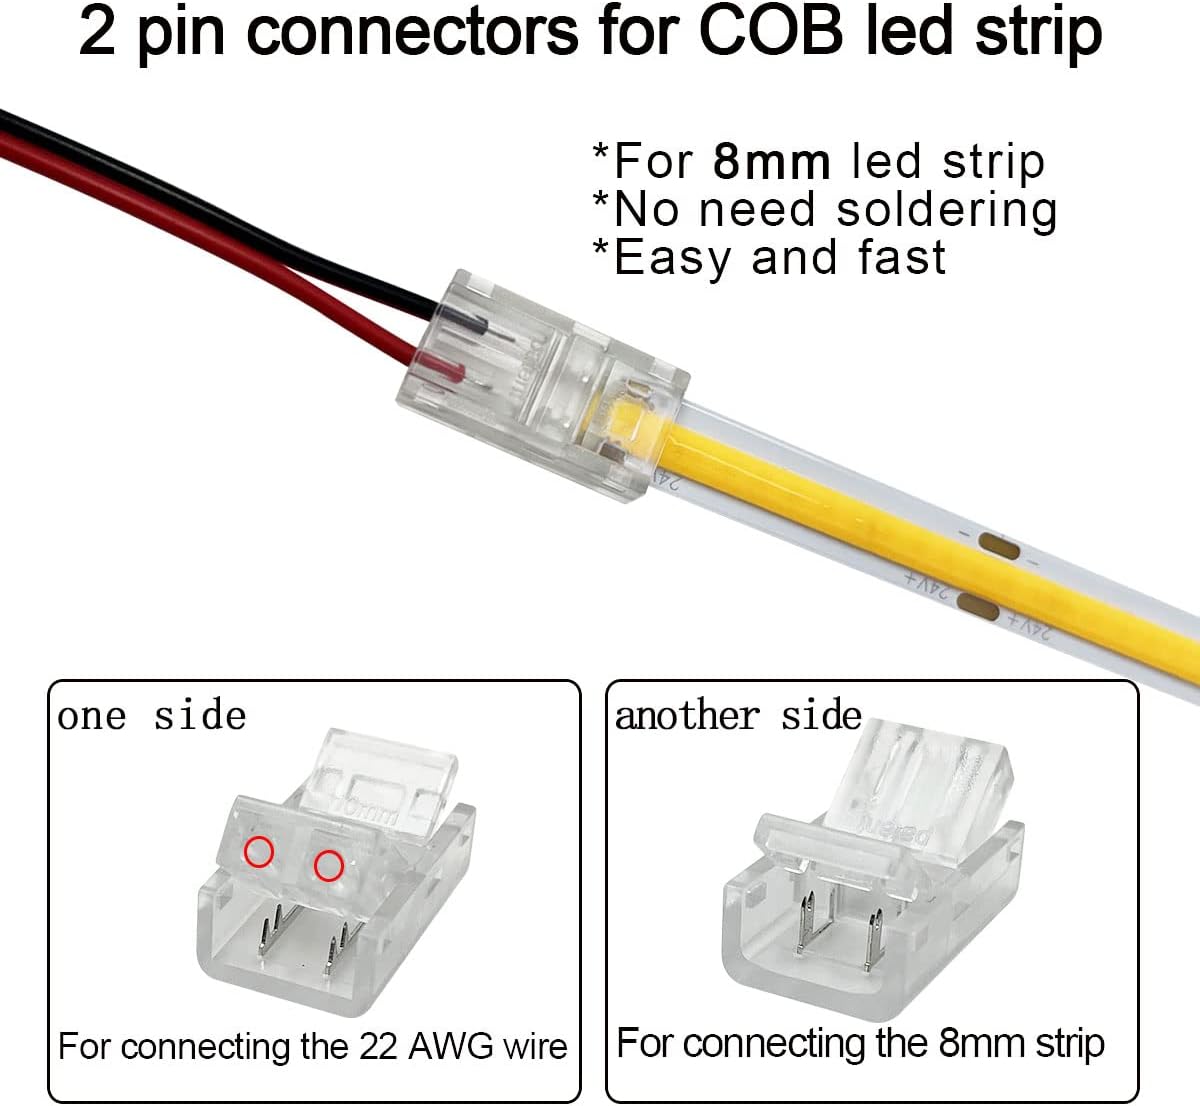 HAMRVL 12 Pack 8mm Cob Led Strip Light Connectors 2 Pin, led Strip to Wire Solderless Transparent Track Lighting Adapter Connection with 6M/19.68ft Led Wire Extension Cable for White Led Tape 12/24V